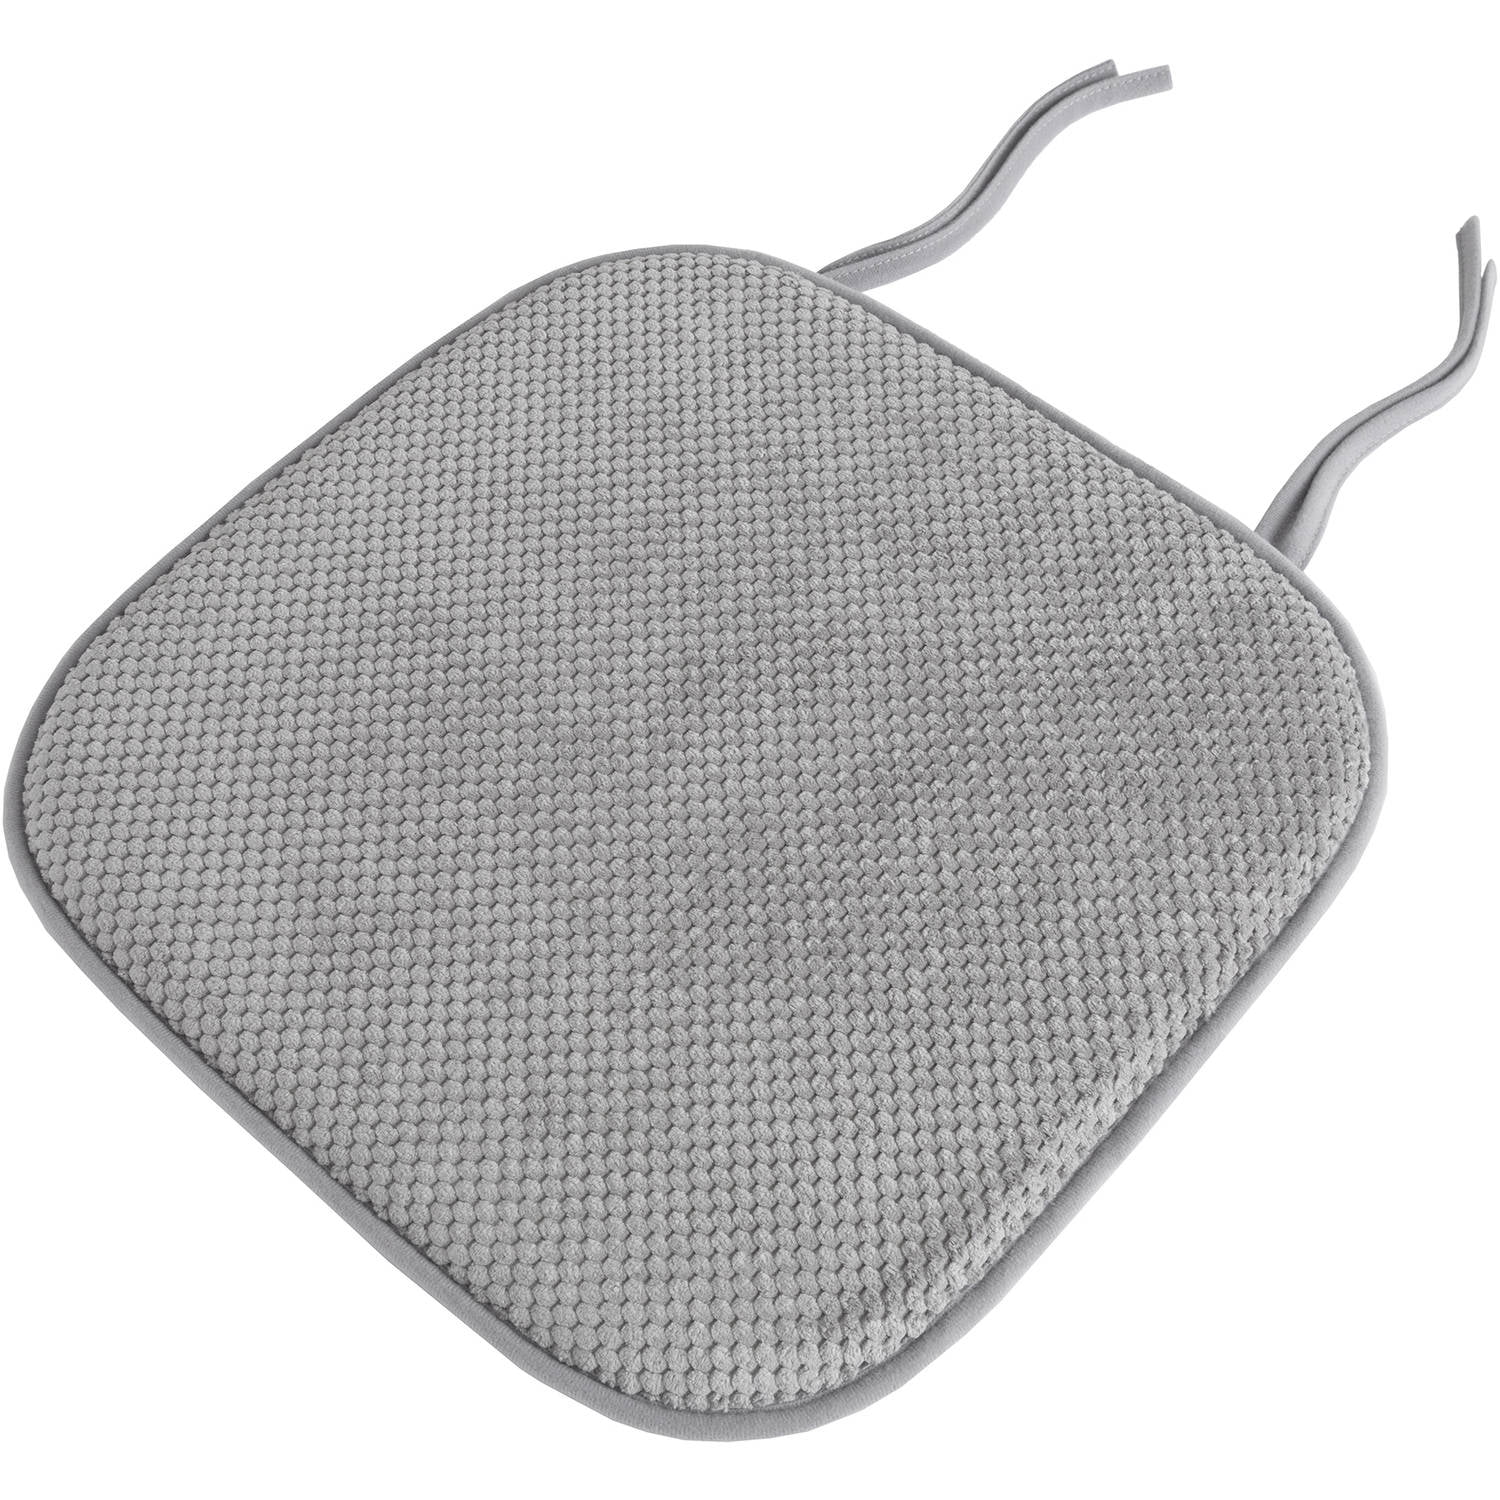 Indoor Chair Pads - The Hearth and Home Store